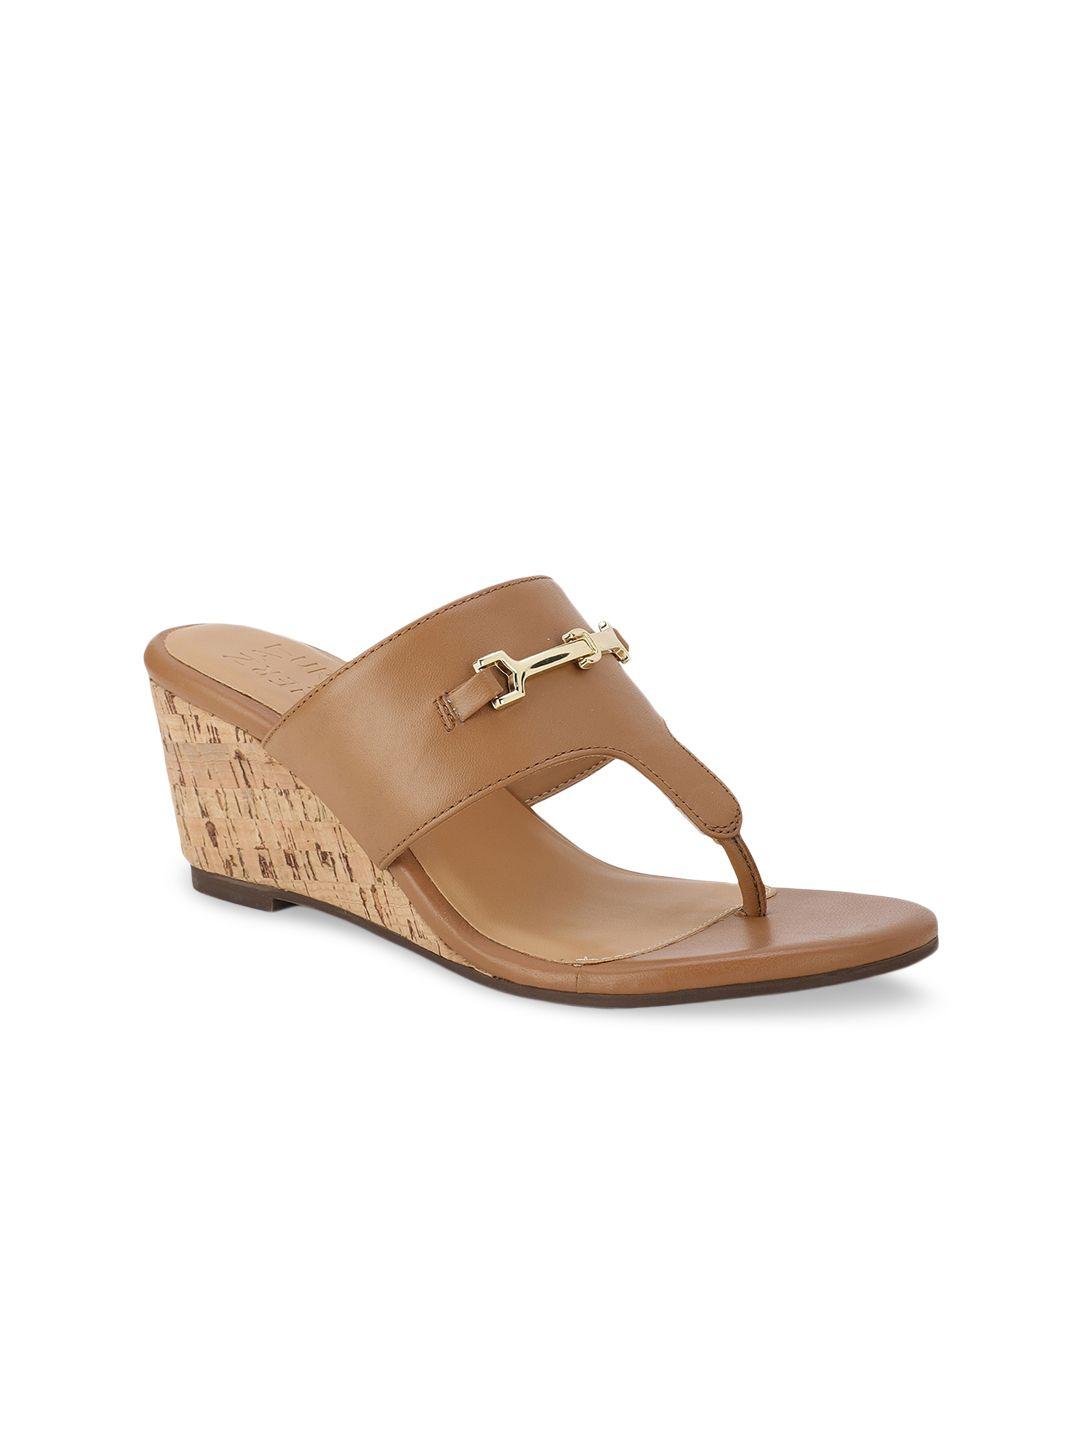 naturalizer-beige-leather-wedge-sandals